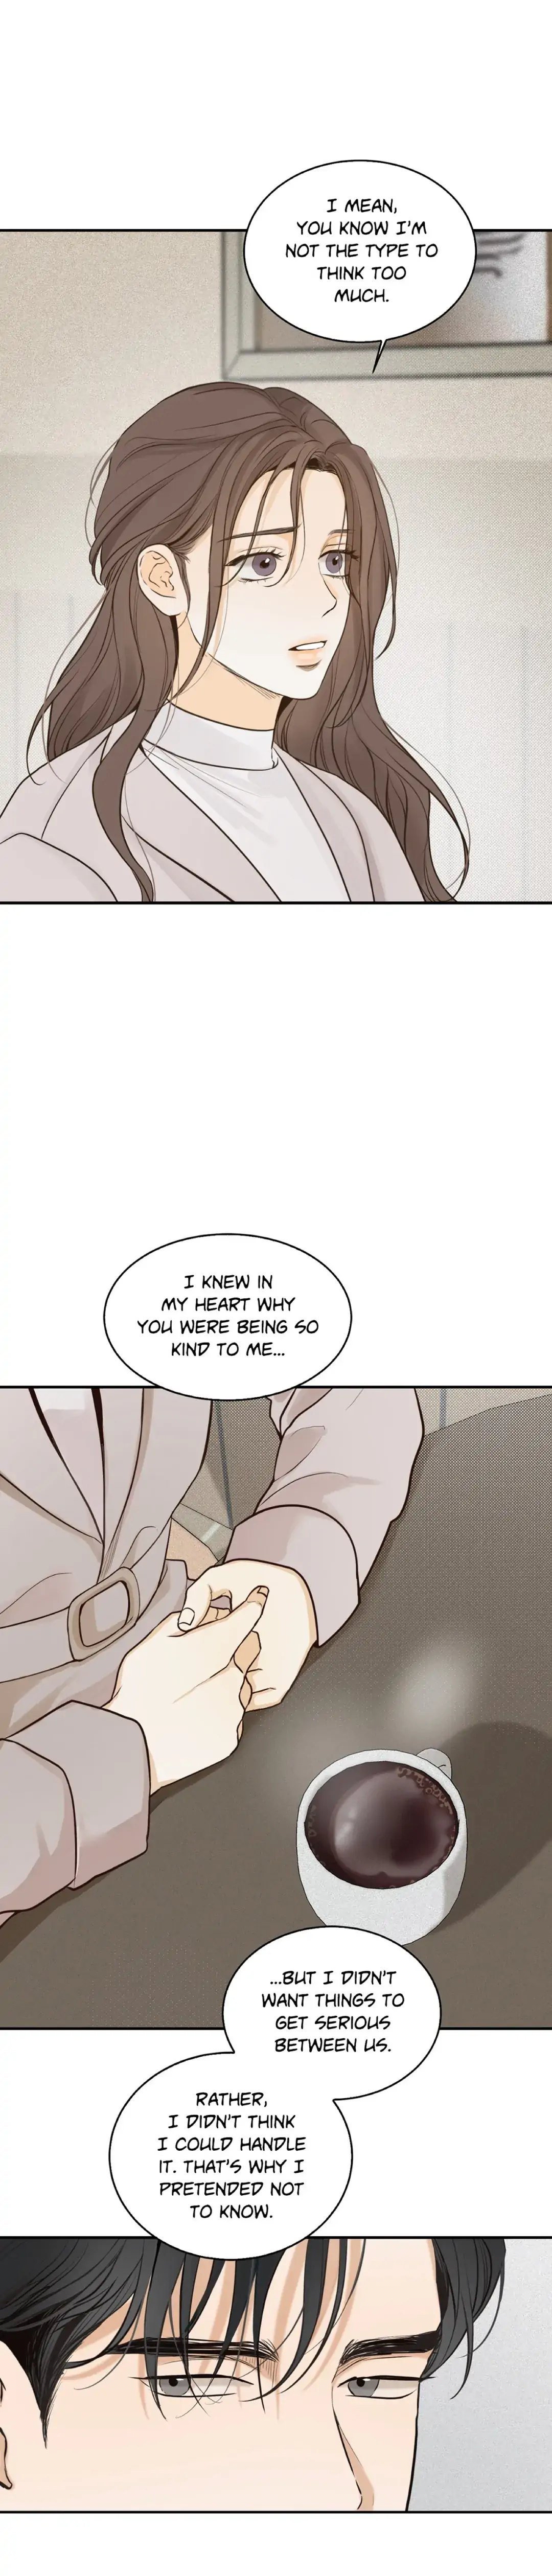 the-men-in-my-bed-chap-42-19